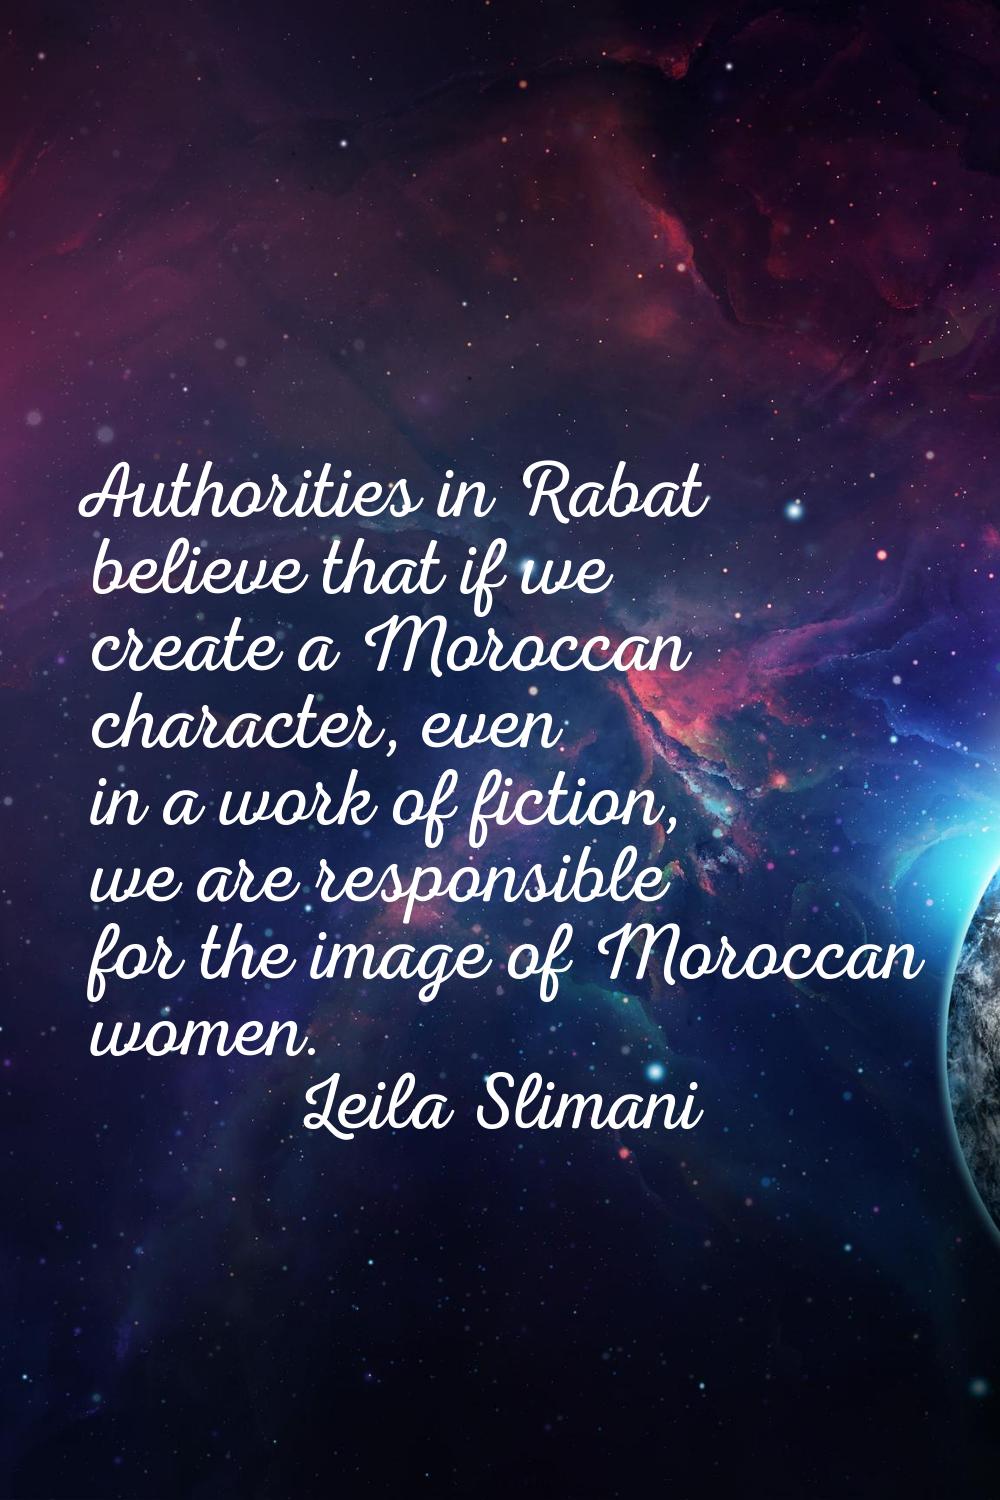 Authorities in Rabat believe that if we create a Moroccan character, even in a work of fiction, we 